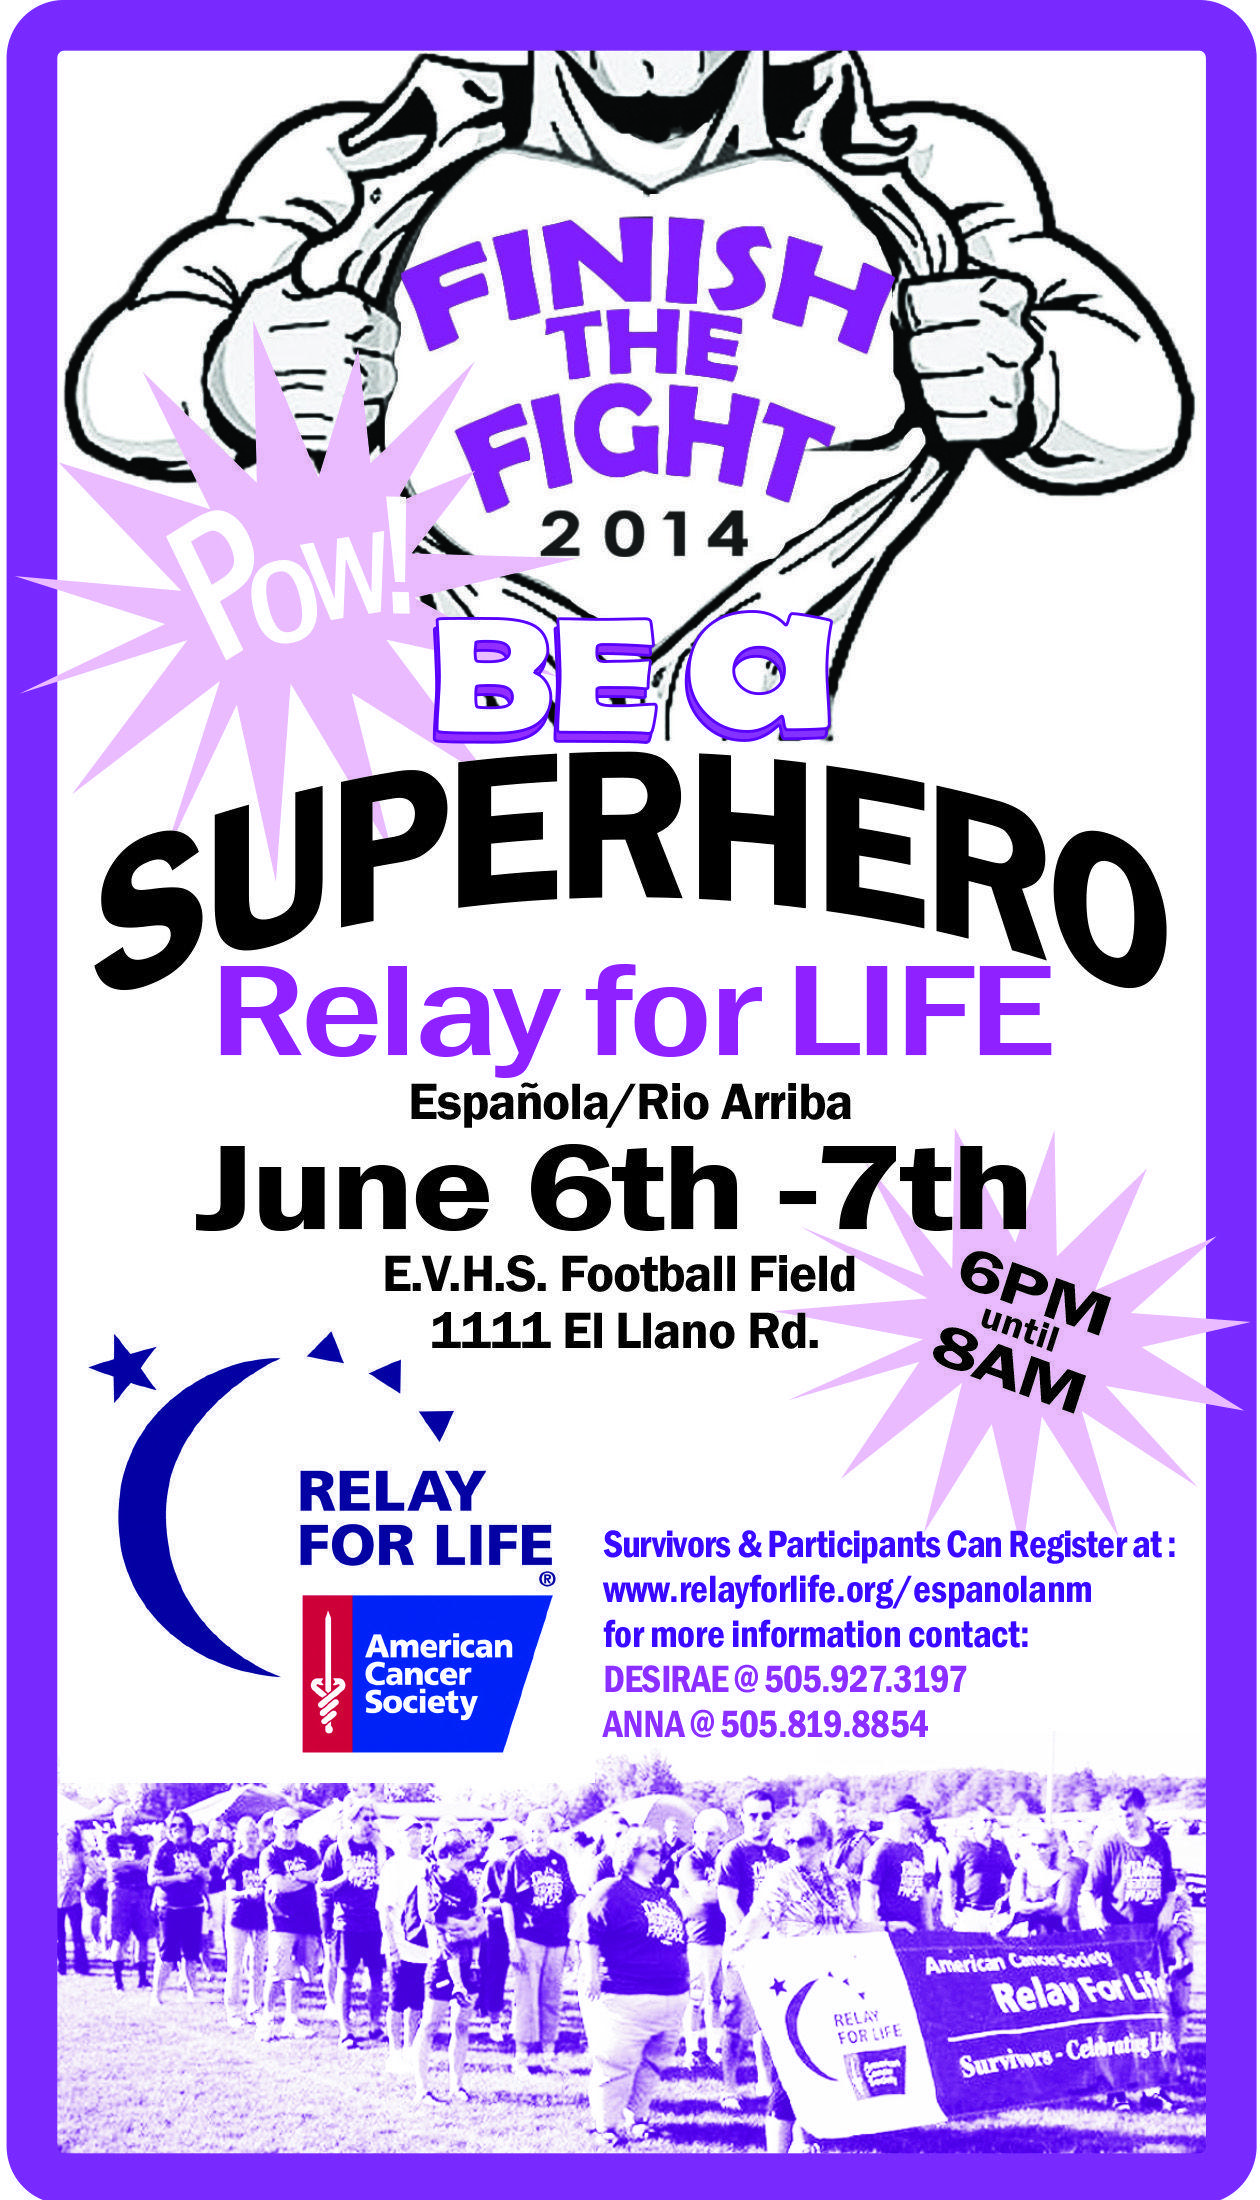 Relay for Life Superhero Logo - Relay for Life, (superhero themed) advertisement for the local